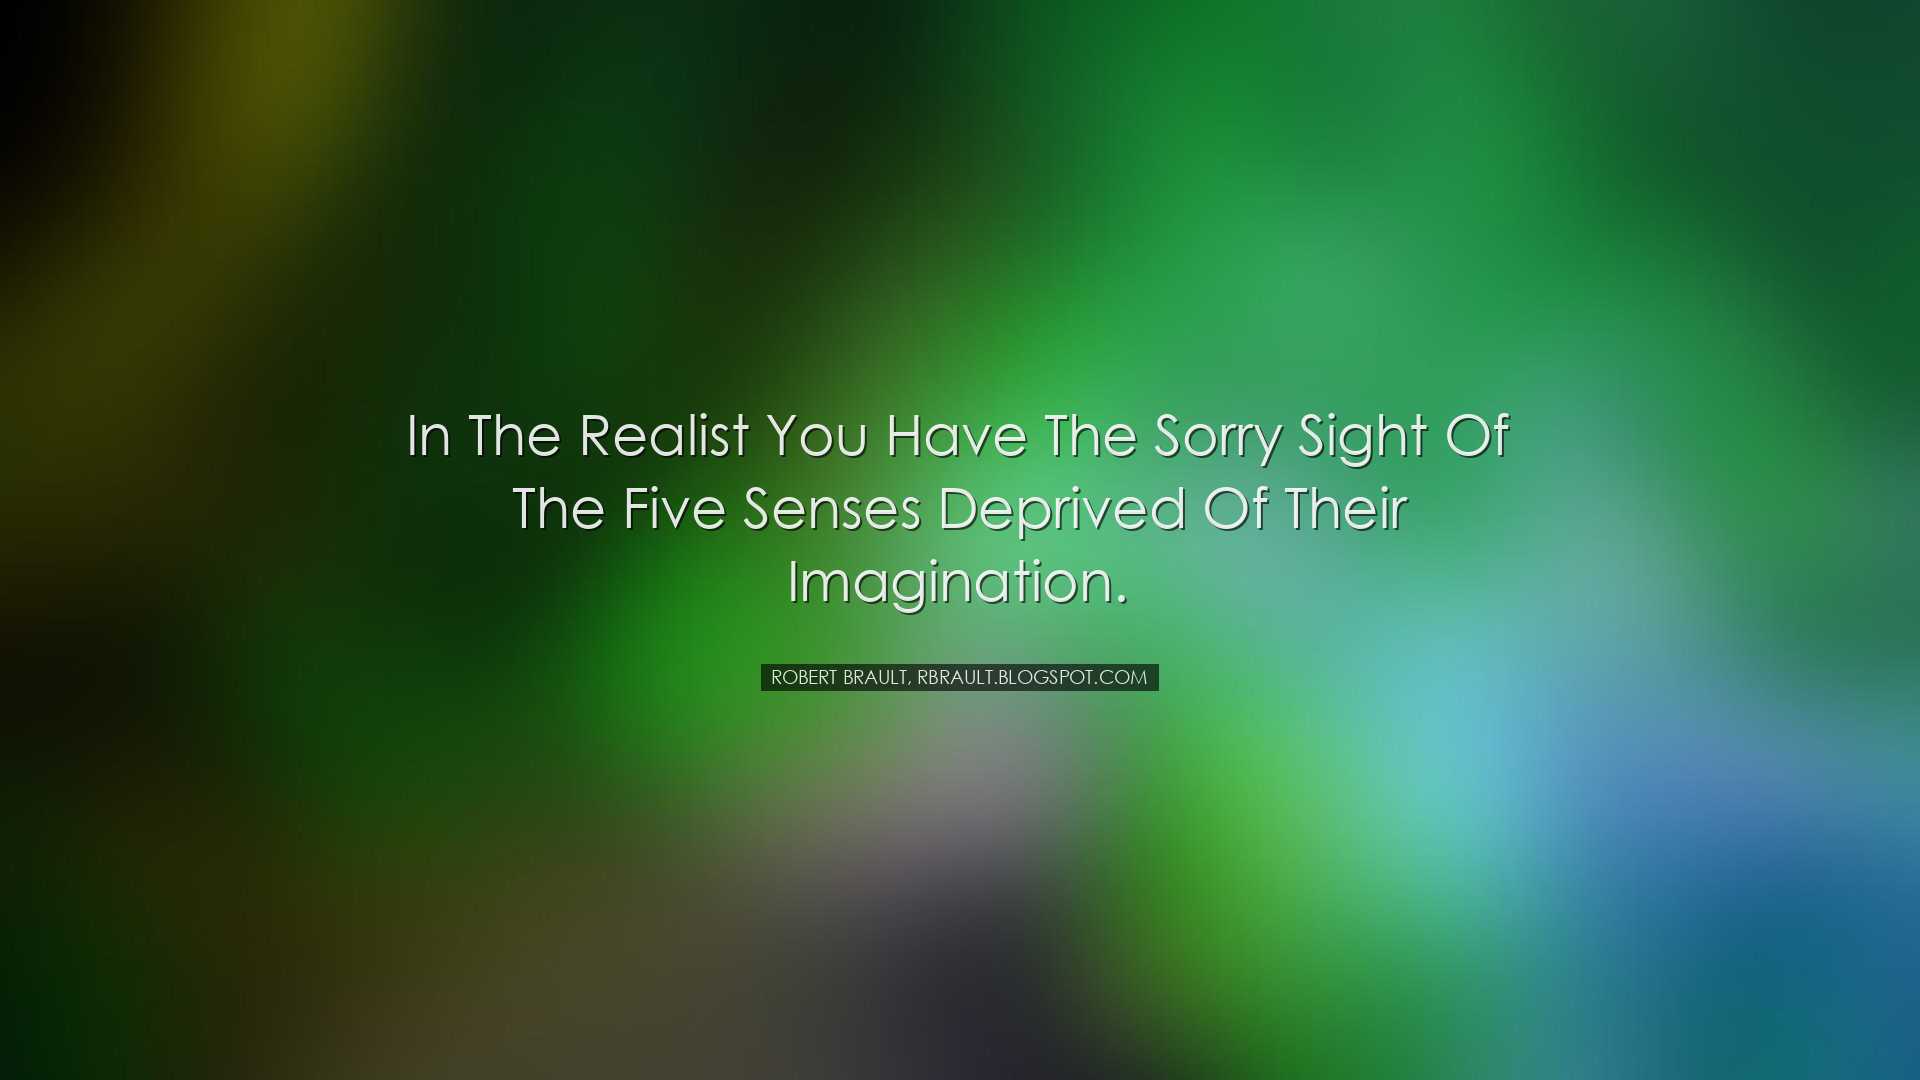 In the realist you have the sorry sight of the five senses deprive